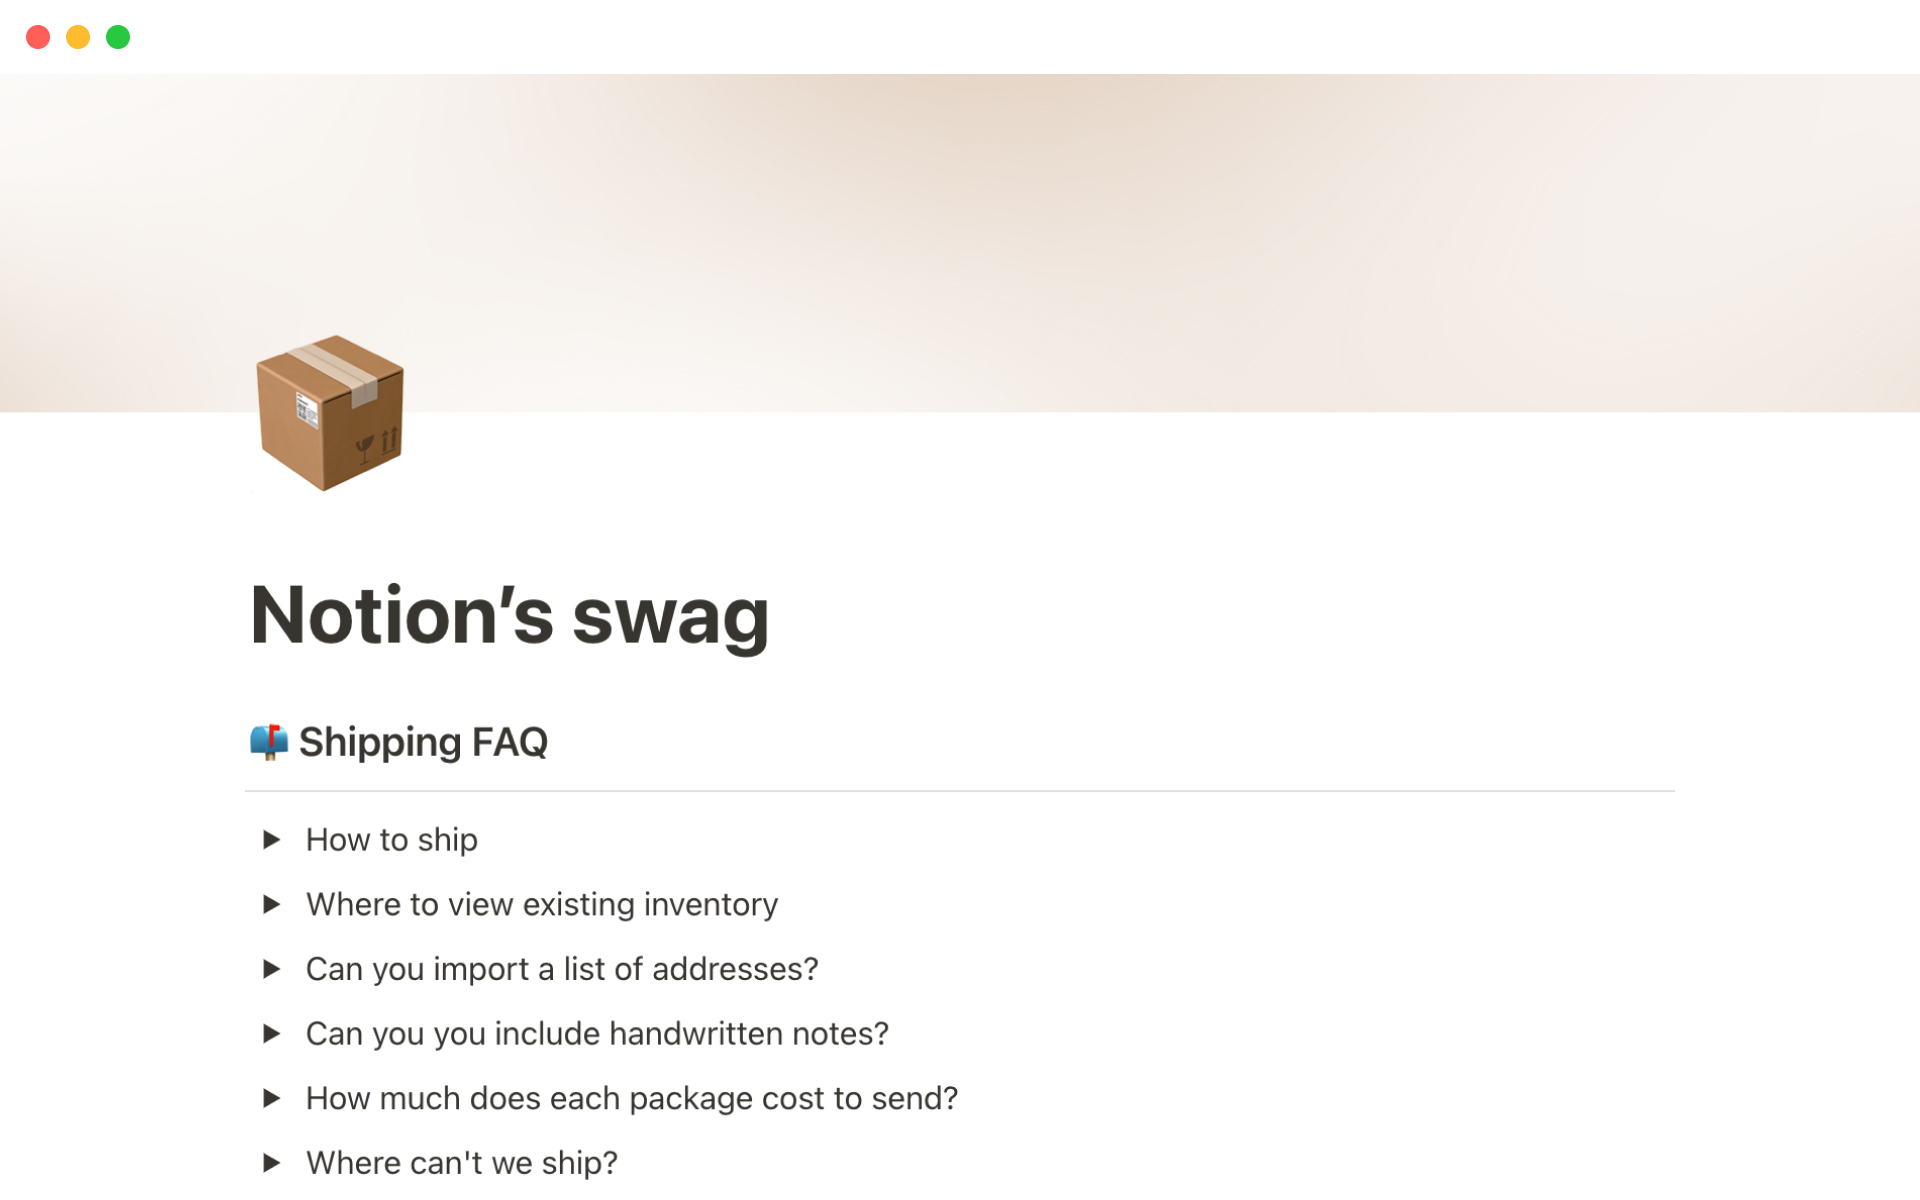 Streamline the promo process to make re-ordering swag simple.